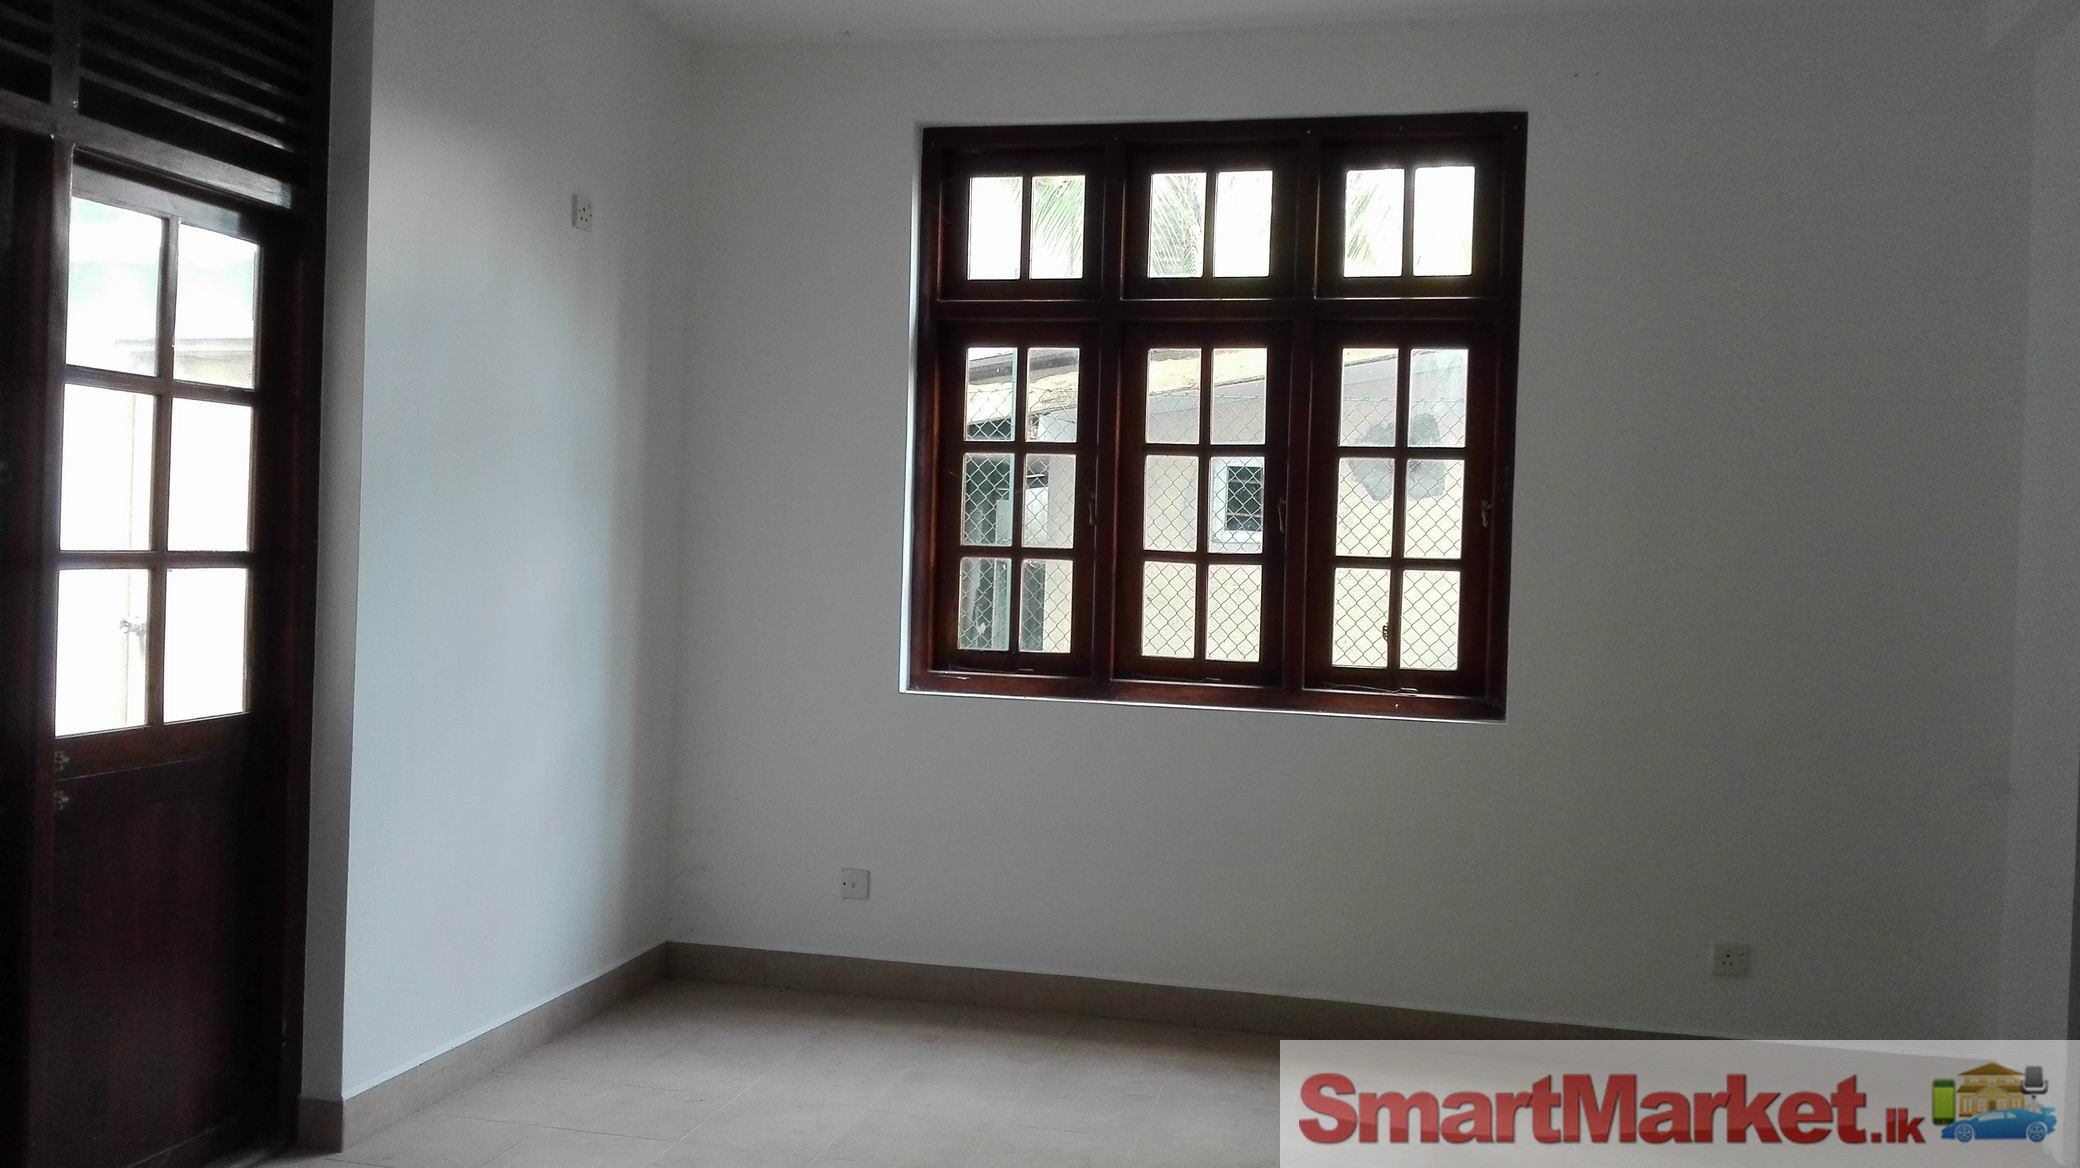 3 Story House for Sale in highly residential area at Nugegoda